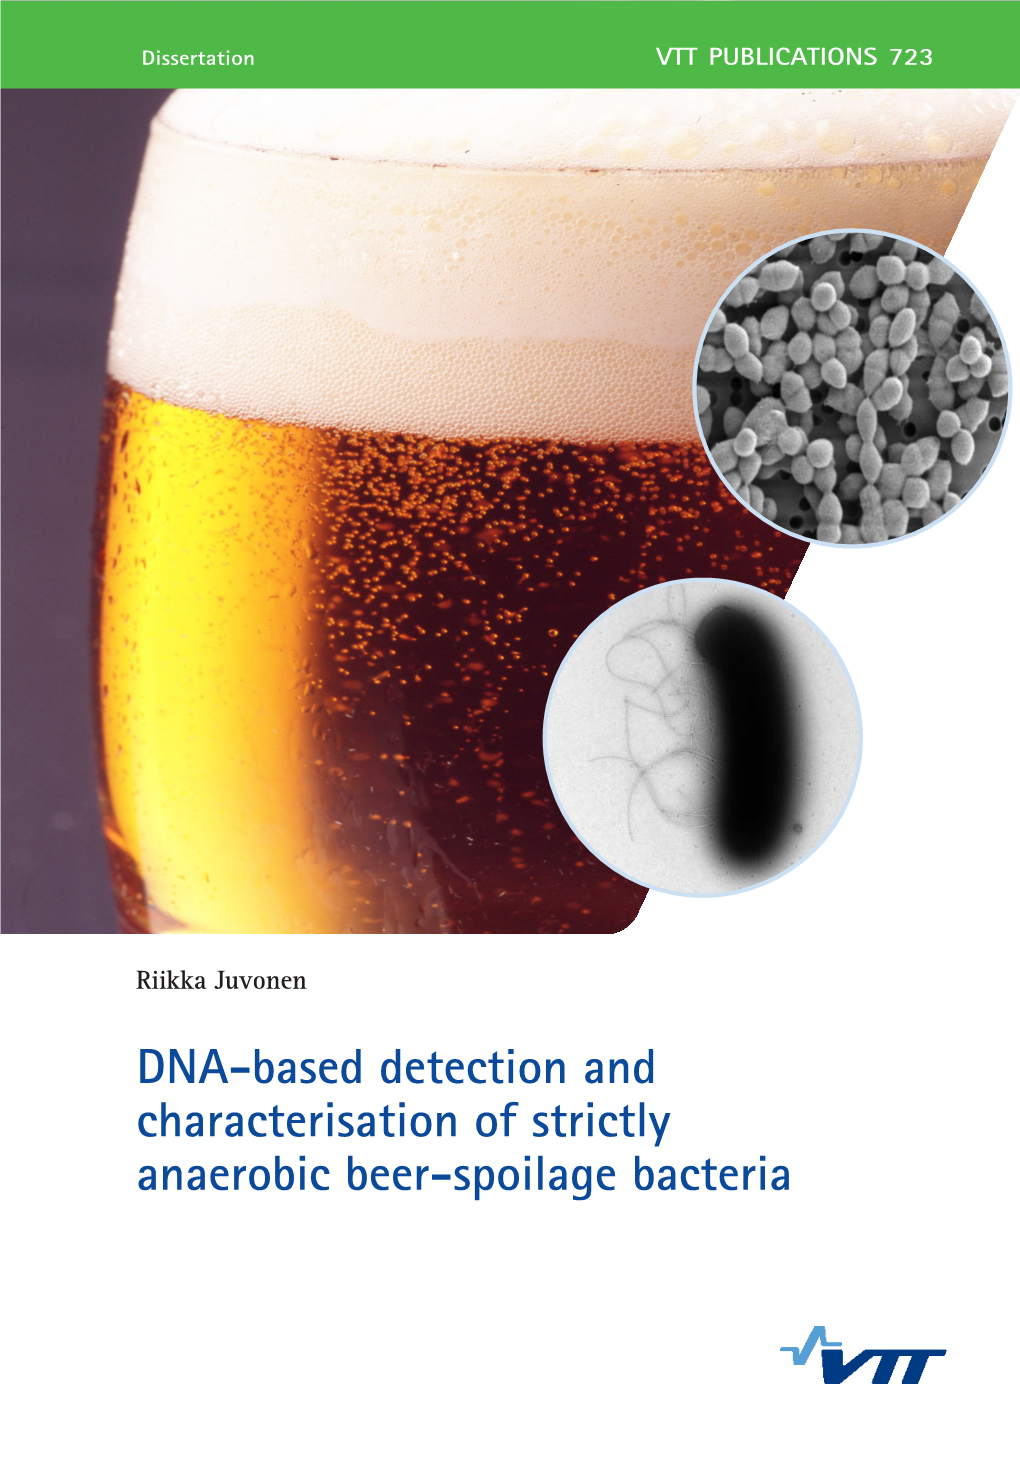 DNA-Based Detection and Characterisation of Strictly Anaerobic Beer-Spoilage Bacteria